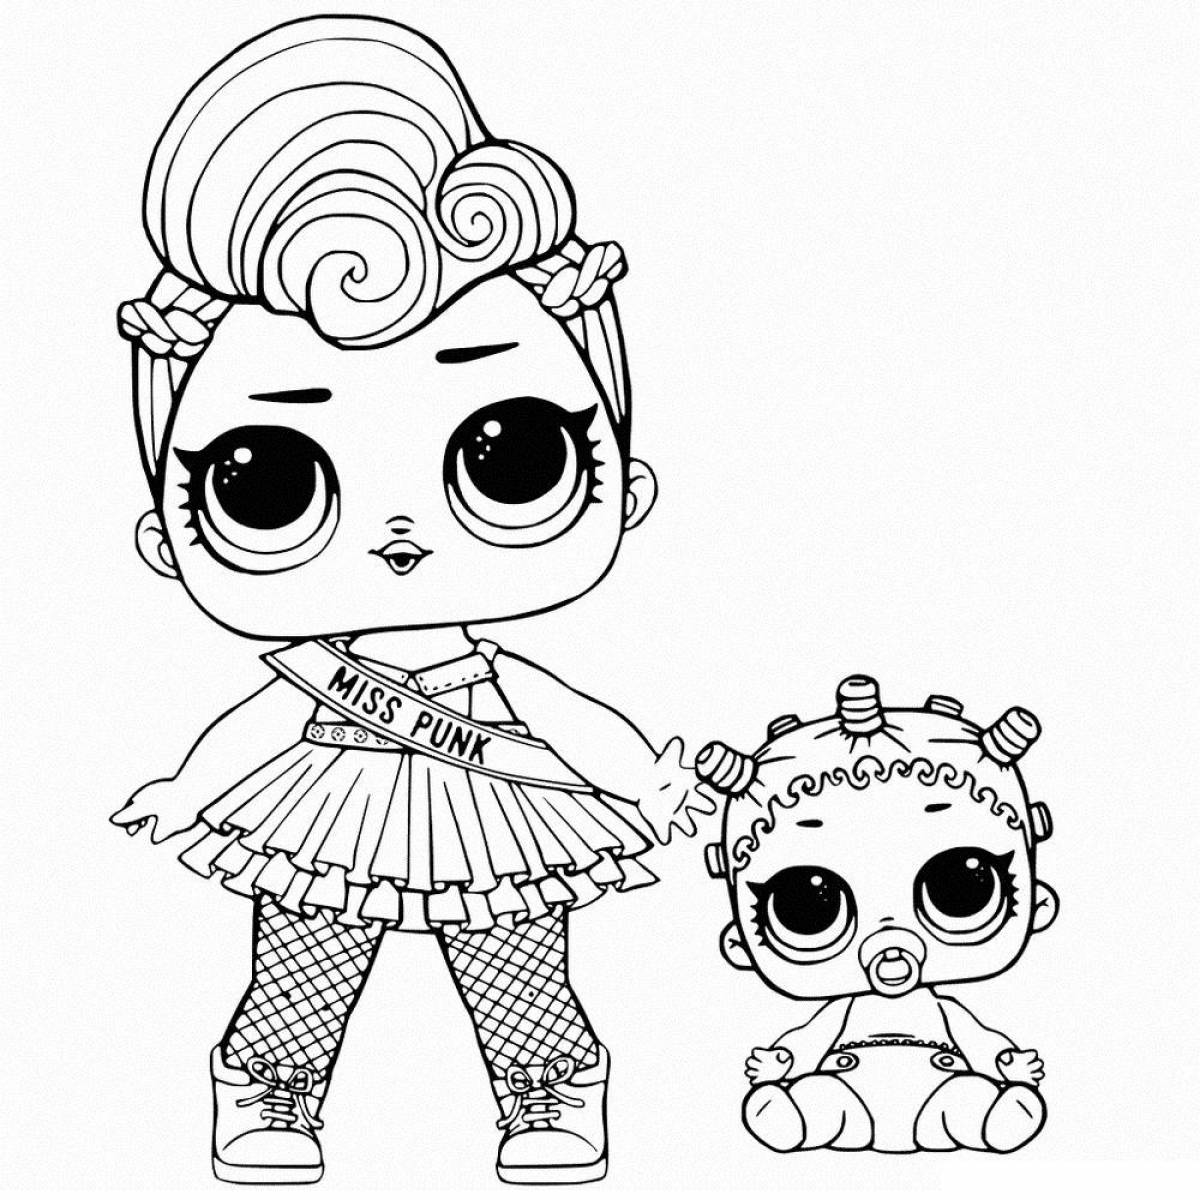 Funny lola dolls coloring for kids